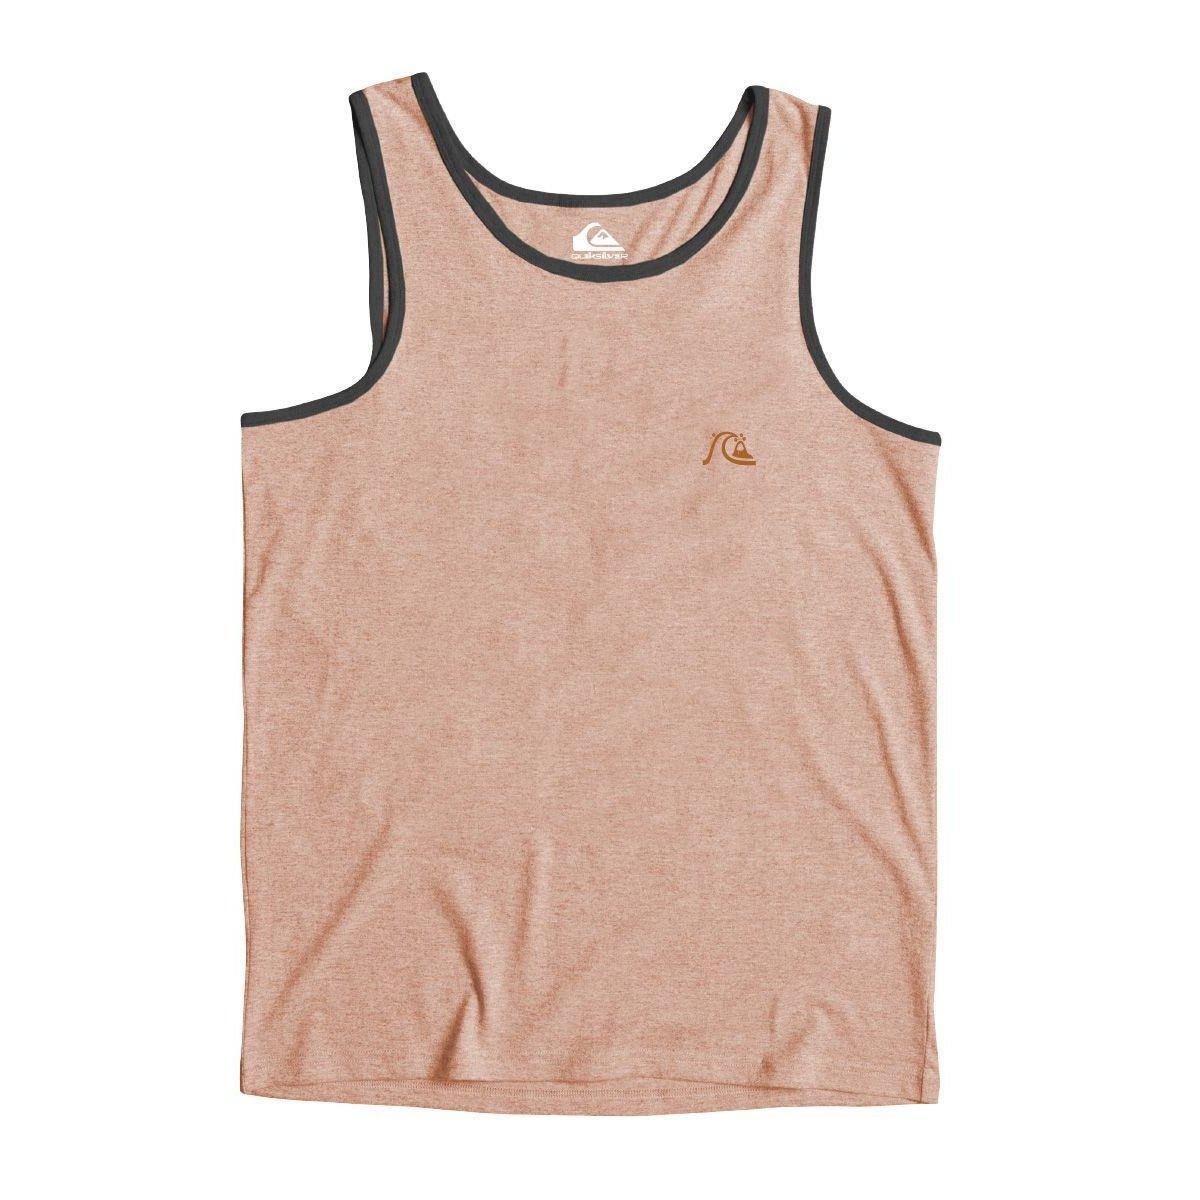 Musculosa Quiksilver Basic Logo Htr Coral - Indy